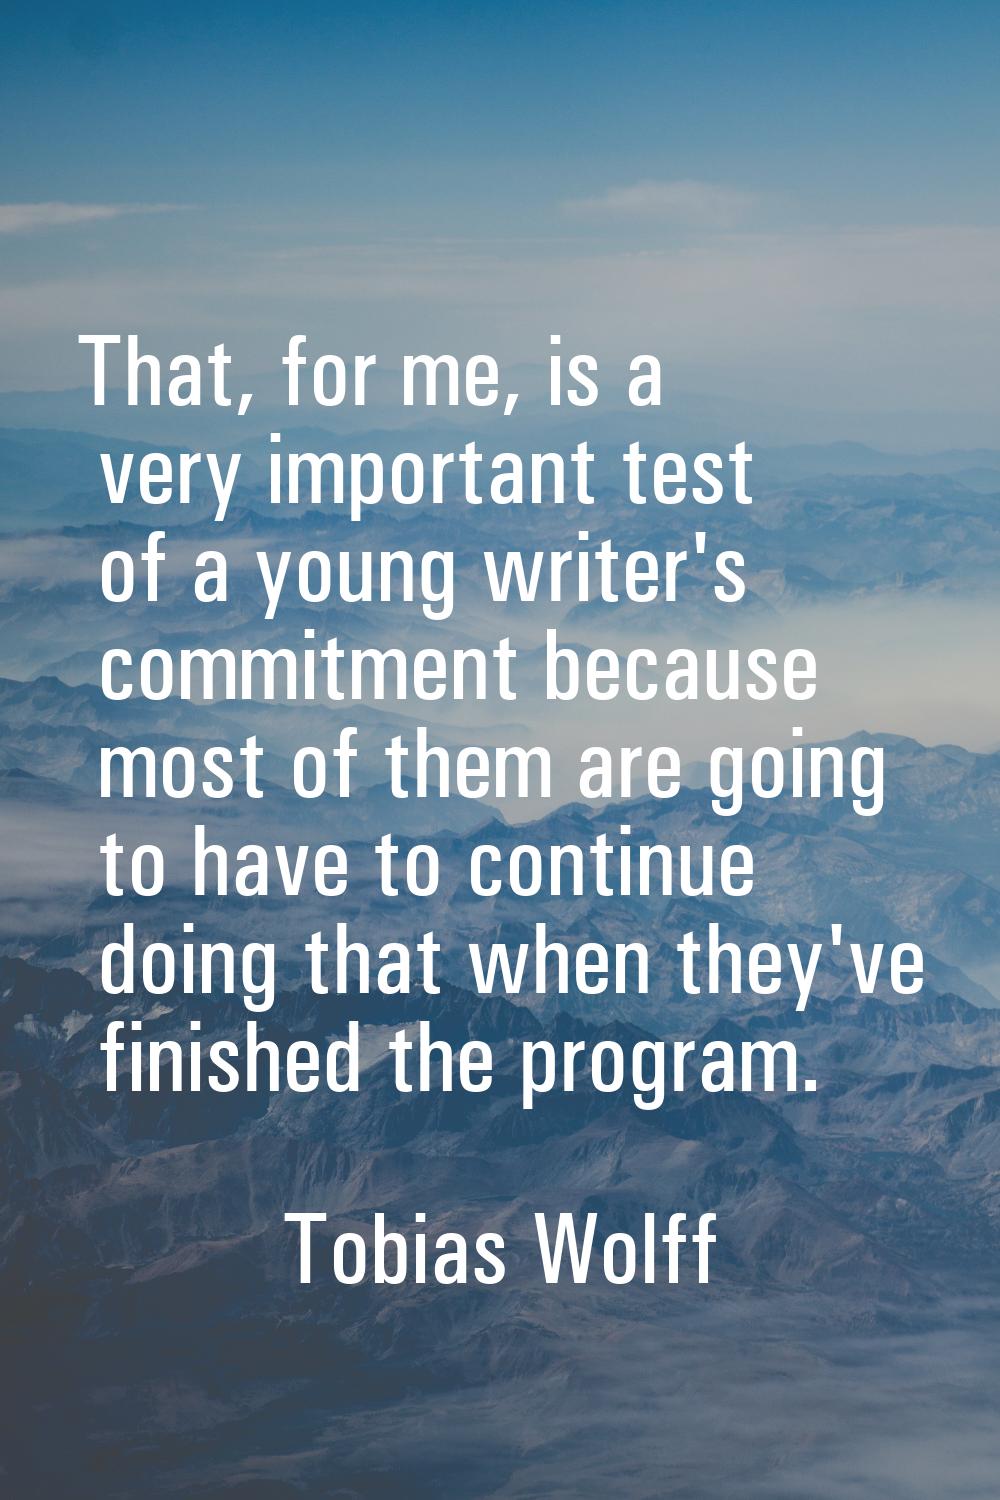 That, for me, is a very important test of a young writer's commitment because most of them are goin